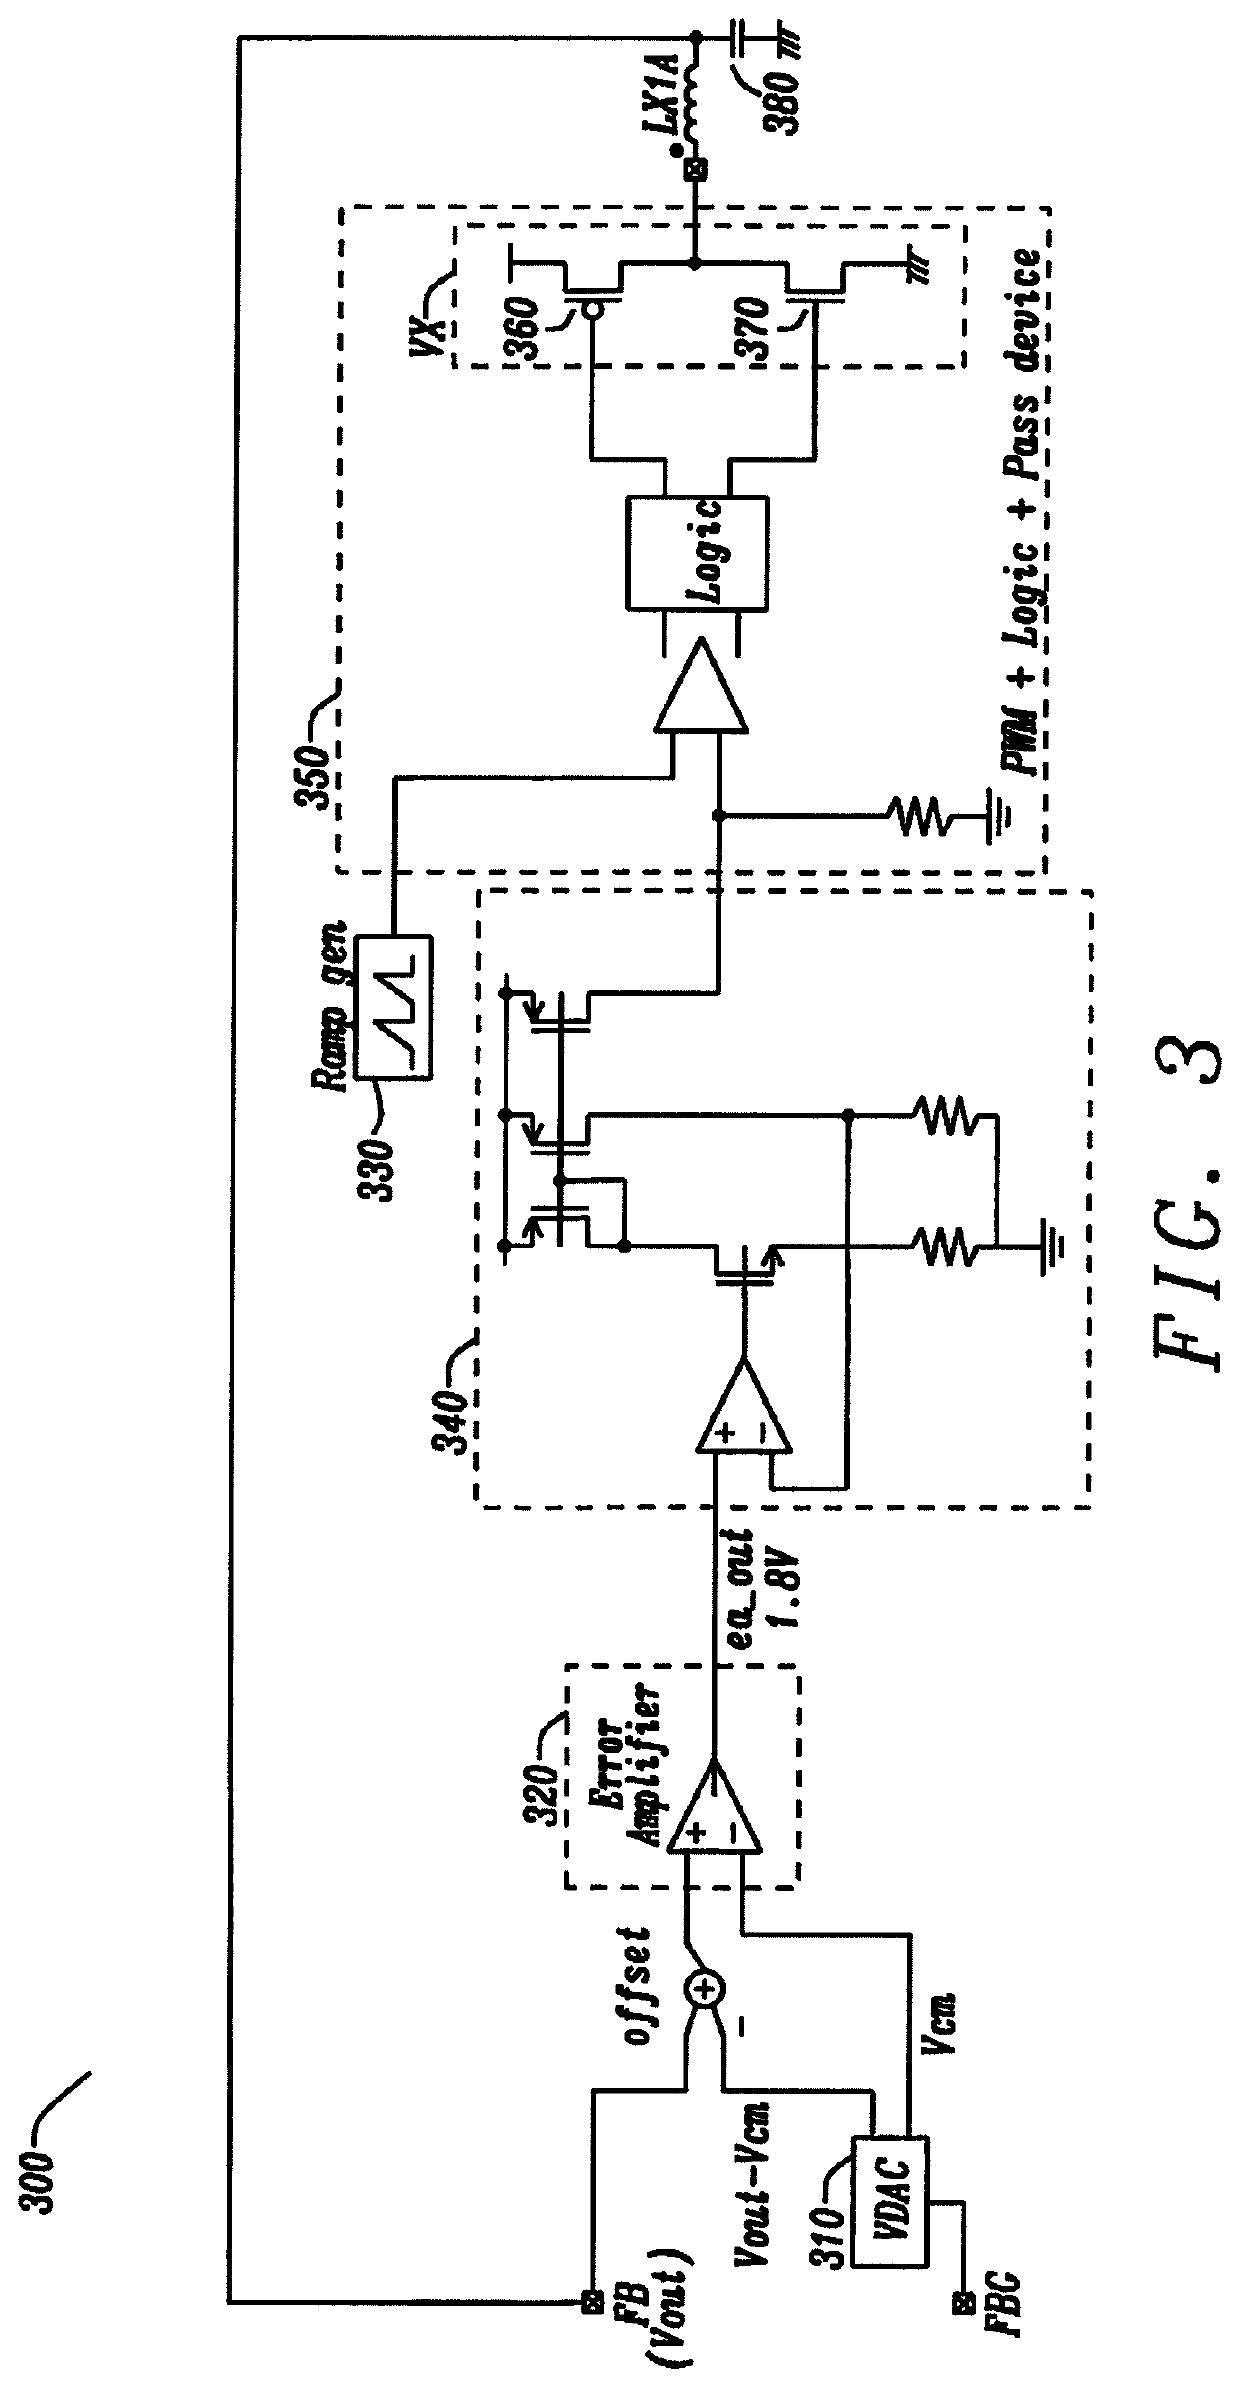 Feedback voltage DC level cancelling for configurable output DC-DC switching converters